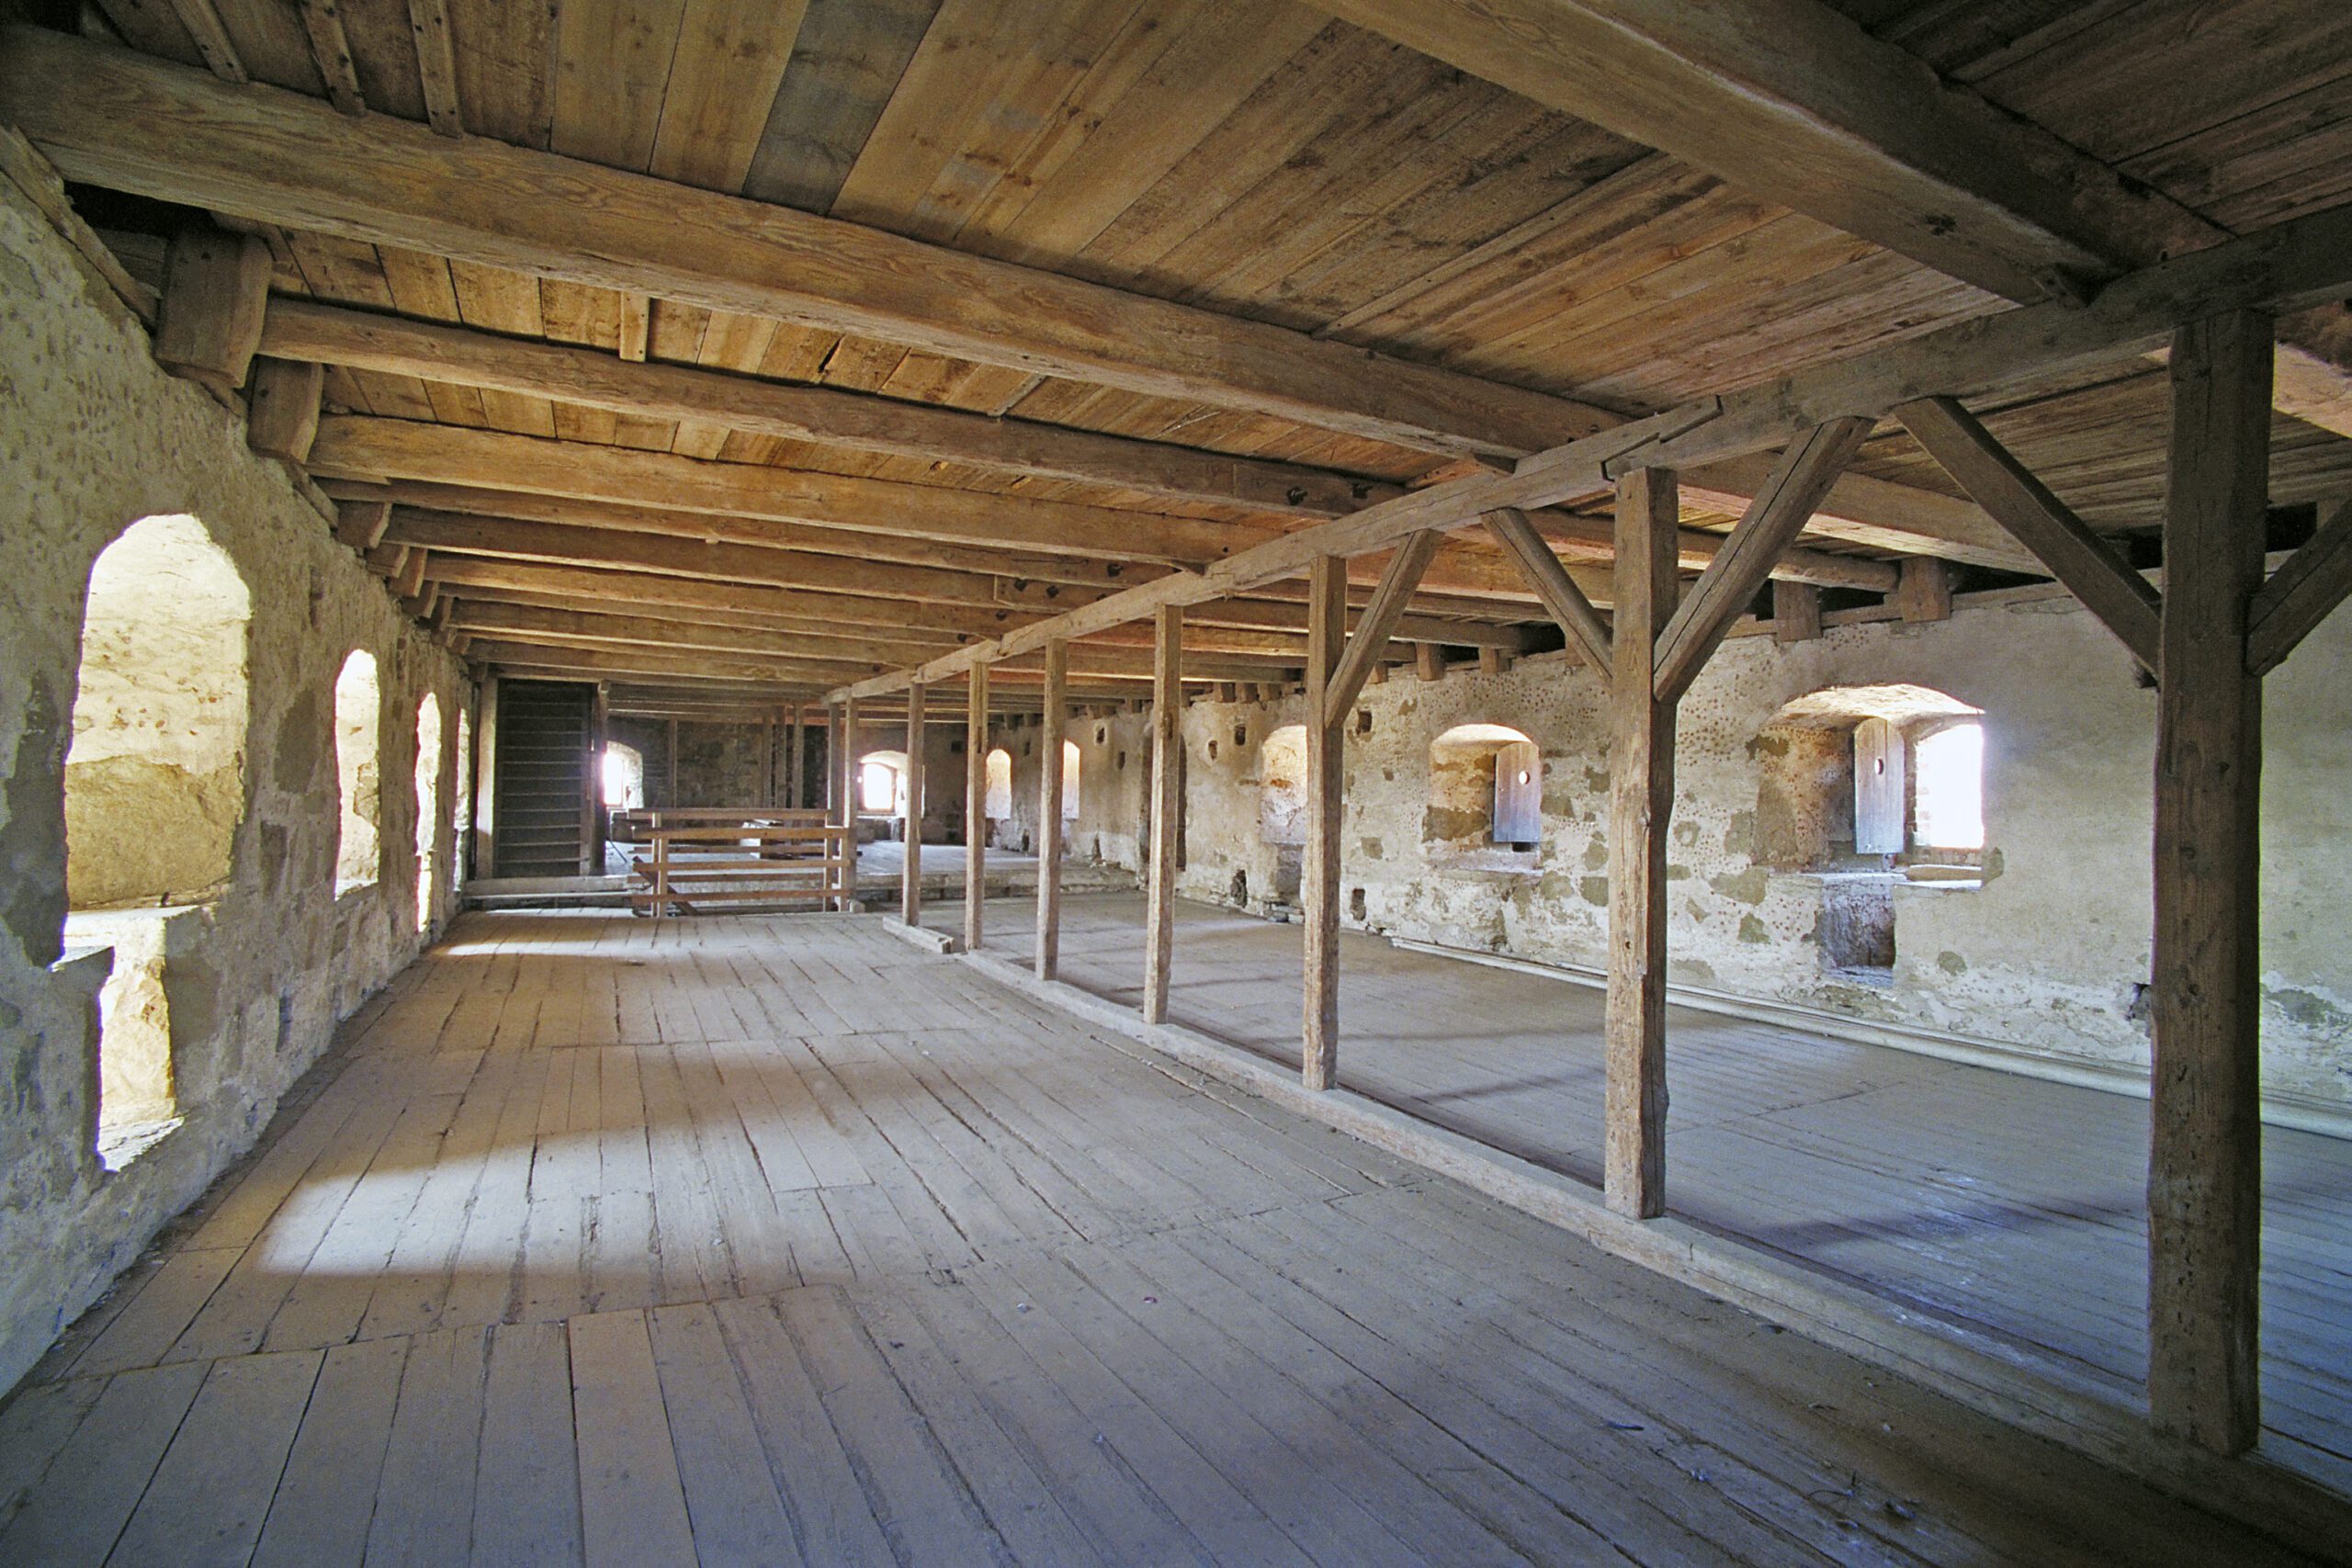 The picture shows an oblong floor plan in the castle with a wooden floor and a wooden ceiling with beams. Along the stone walls are deep window openings.